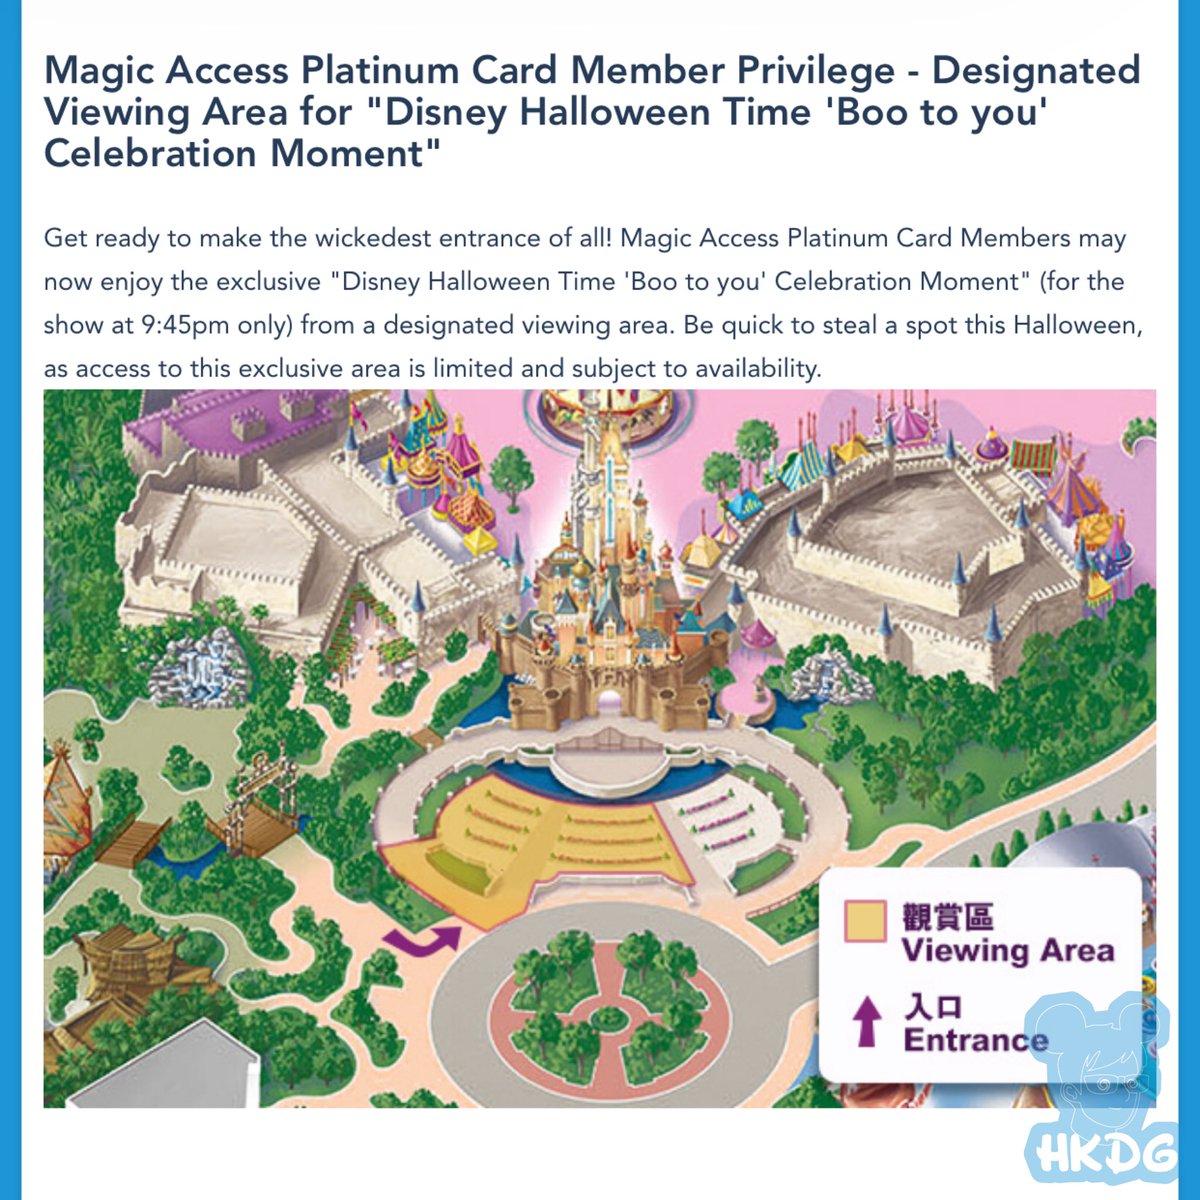 '#DisneyHalloweenTime' Magic Access Night is back! On 15 or 16 Sep, enjoy extended opening hours just for #MagicAccess Members until 10:45 PM! Registration is now open for Platinum Magic Access Members and will soon be opened to members in other tiers.

#disneyhalloween